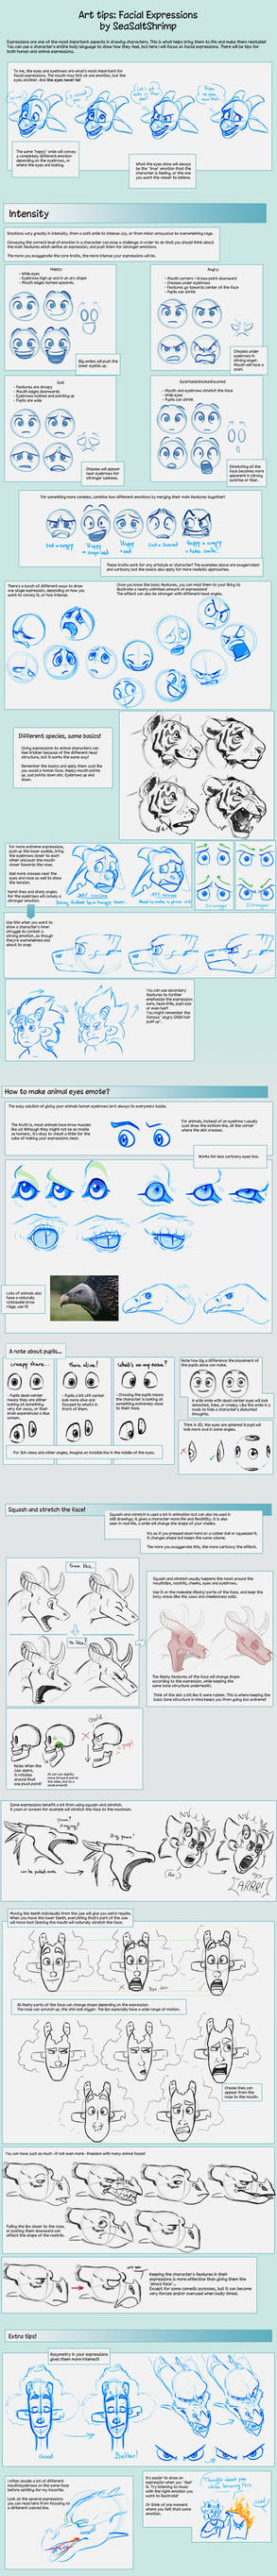 Art Tips on Facial Expressions